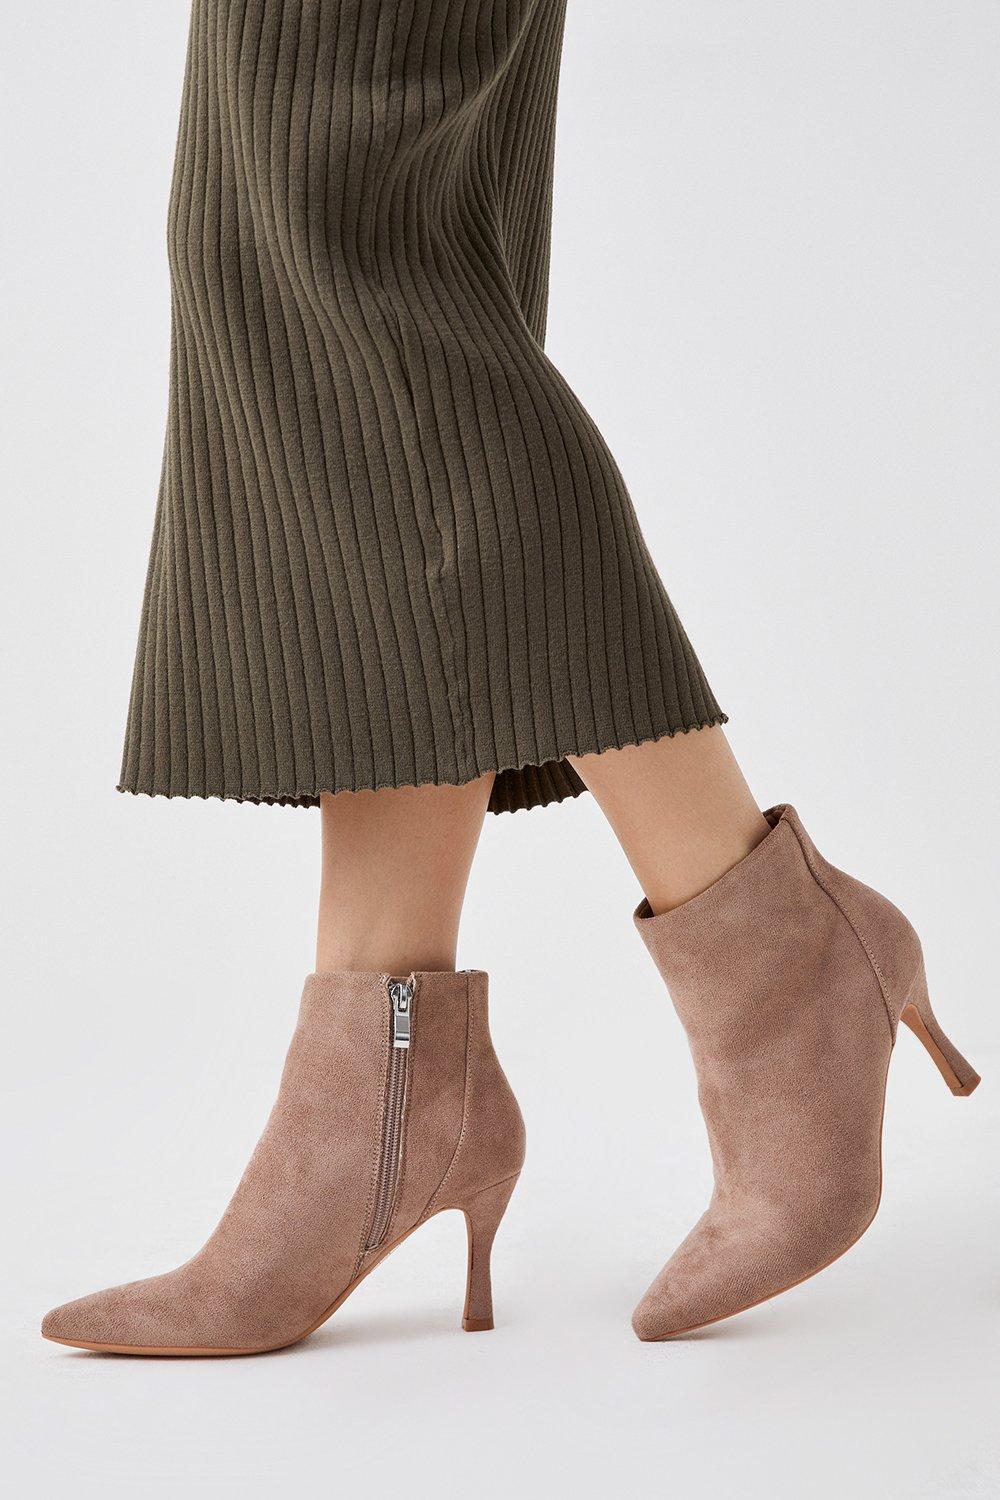 Women’s Principles: Ophelia Pointed Medium Heel Ankle Boots - taupe - 4